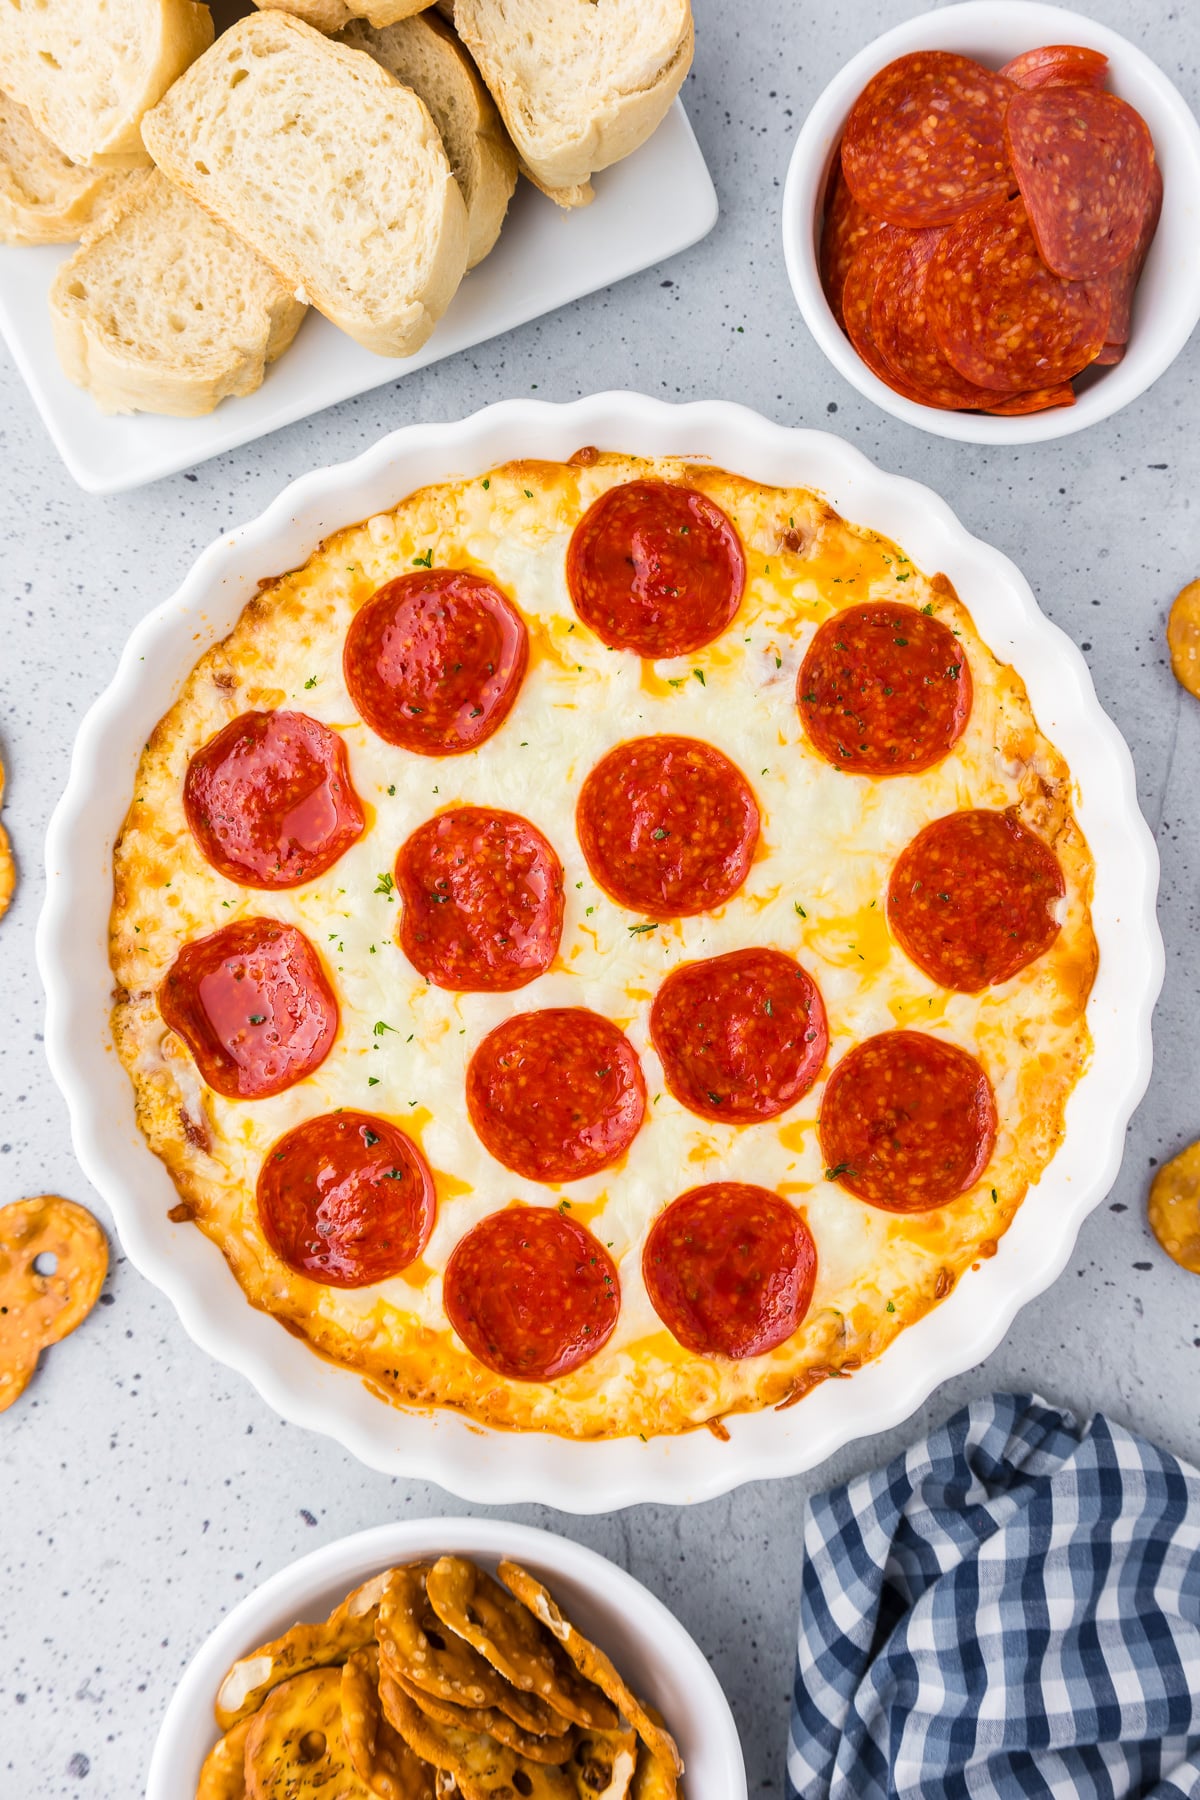 Pepperoni dip in a white round pie dish with pretzels and bread nearby on the counter.